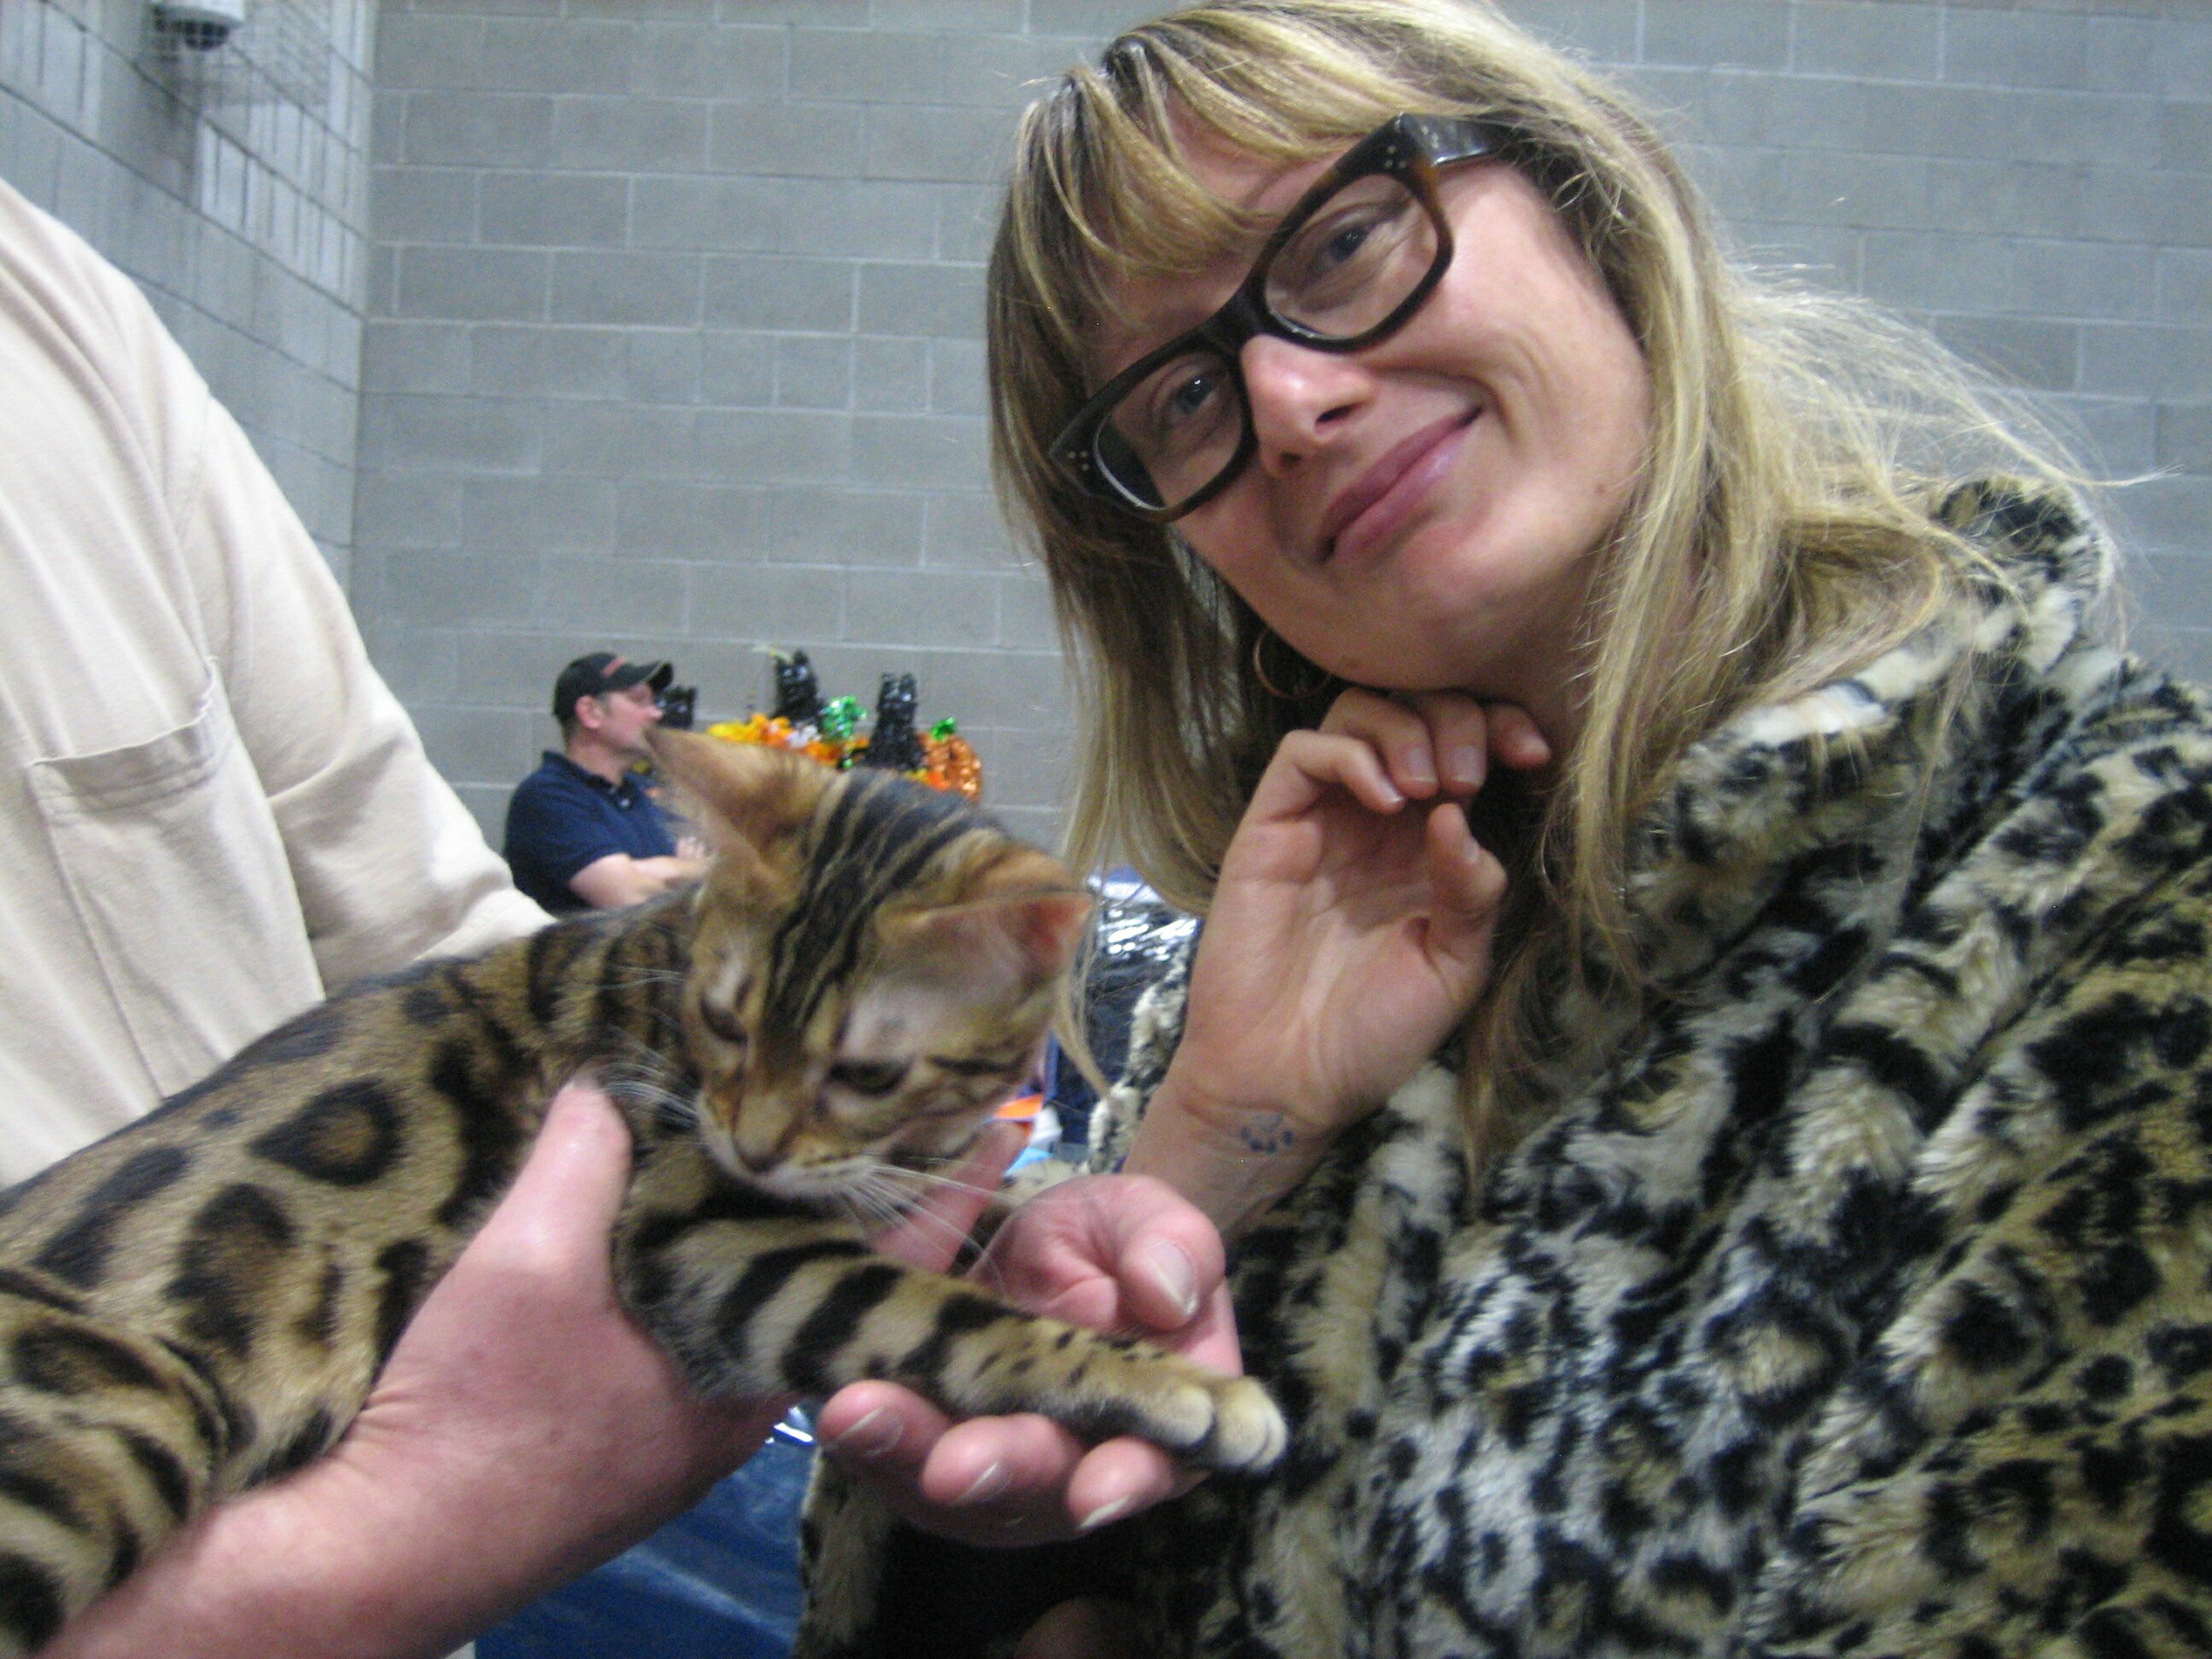 Pam's coat matched this 4-month-old bengal kitten.